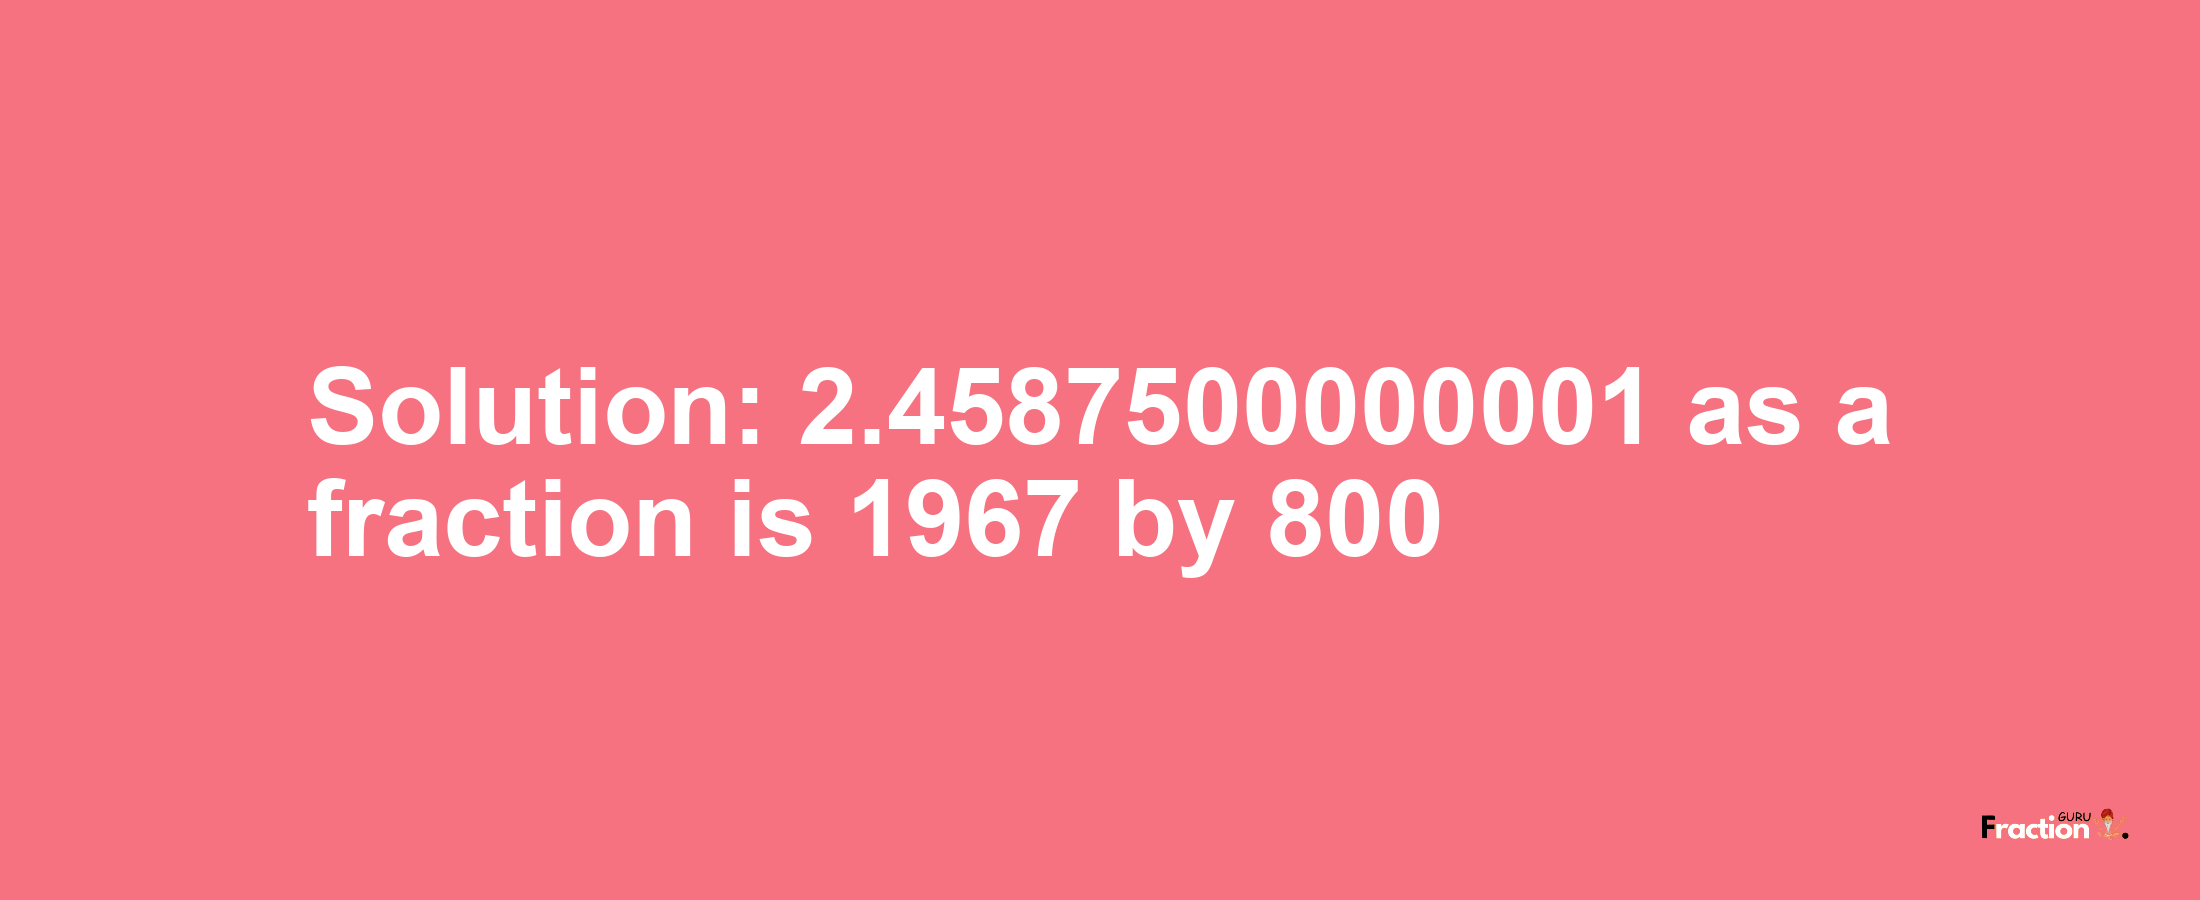 Solution:2.4587500000001 as a fraction is 1967/800